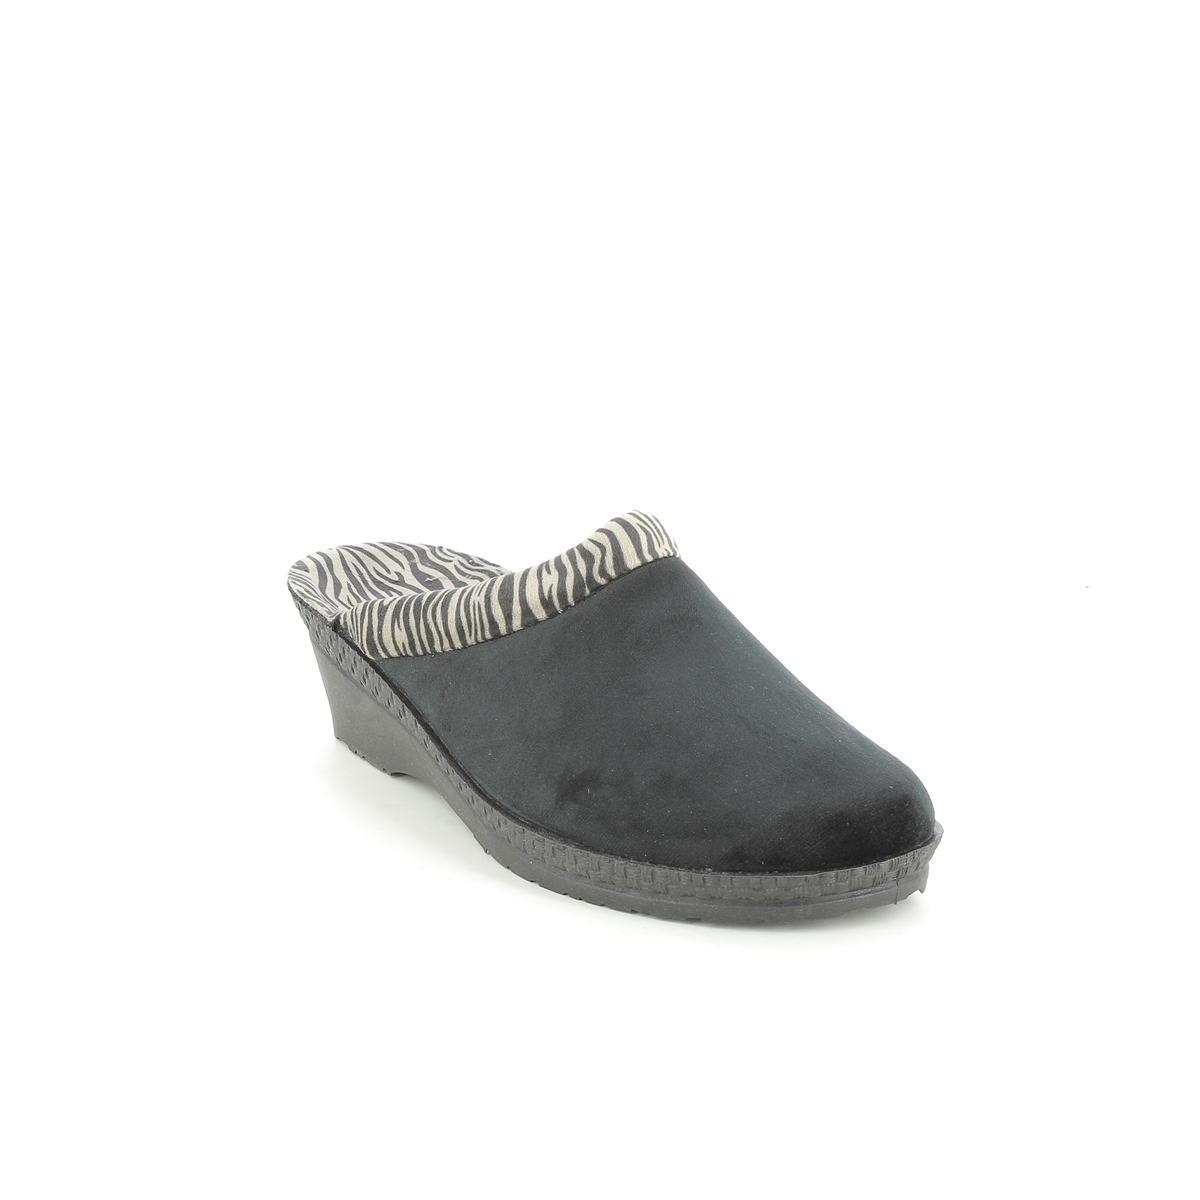 Rohde Neustadt Sparky Black Womens slipper mules 2465-90 in a Plain  in Size 37